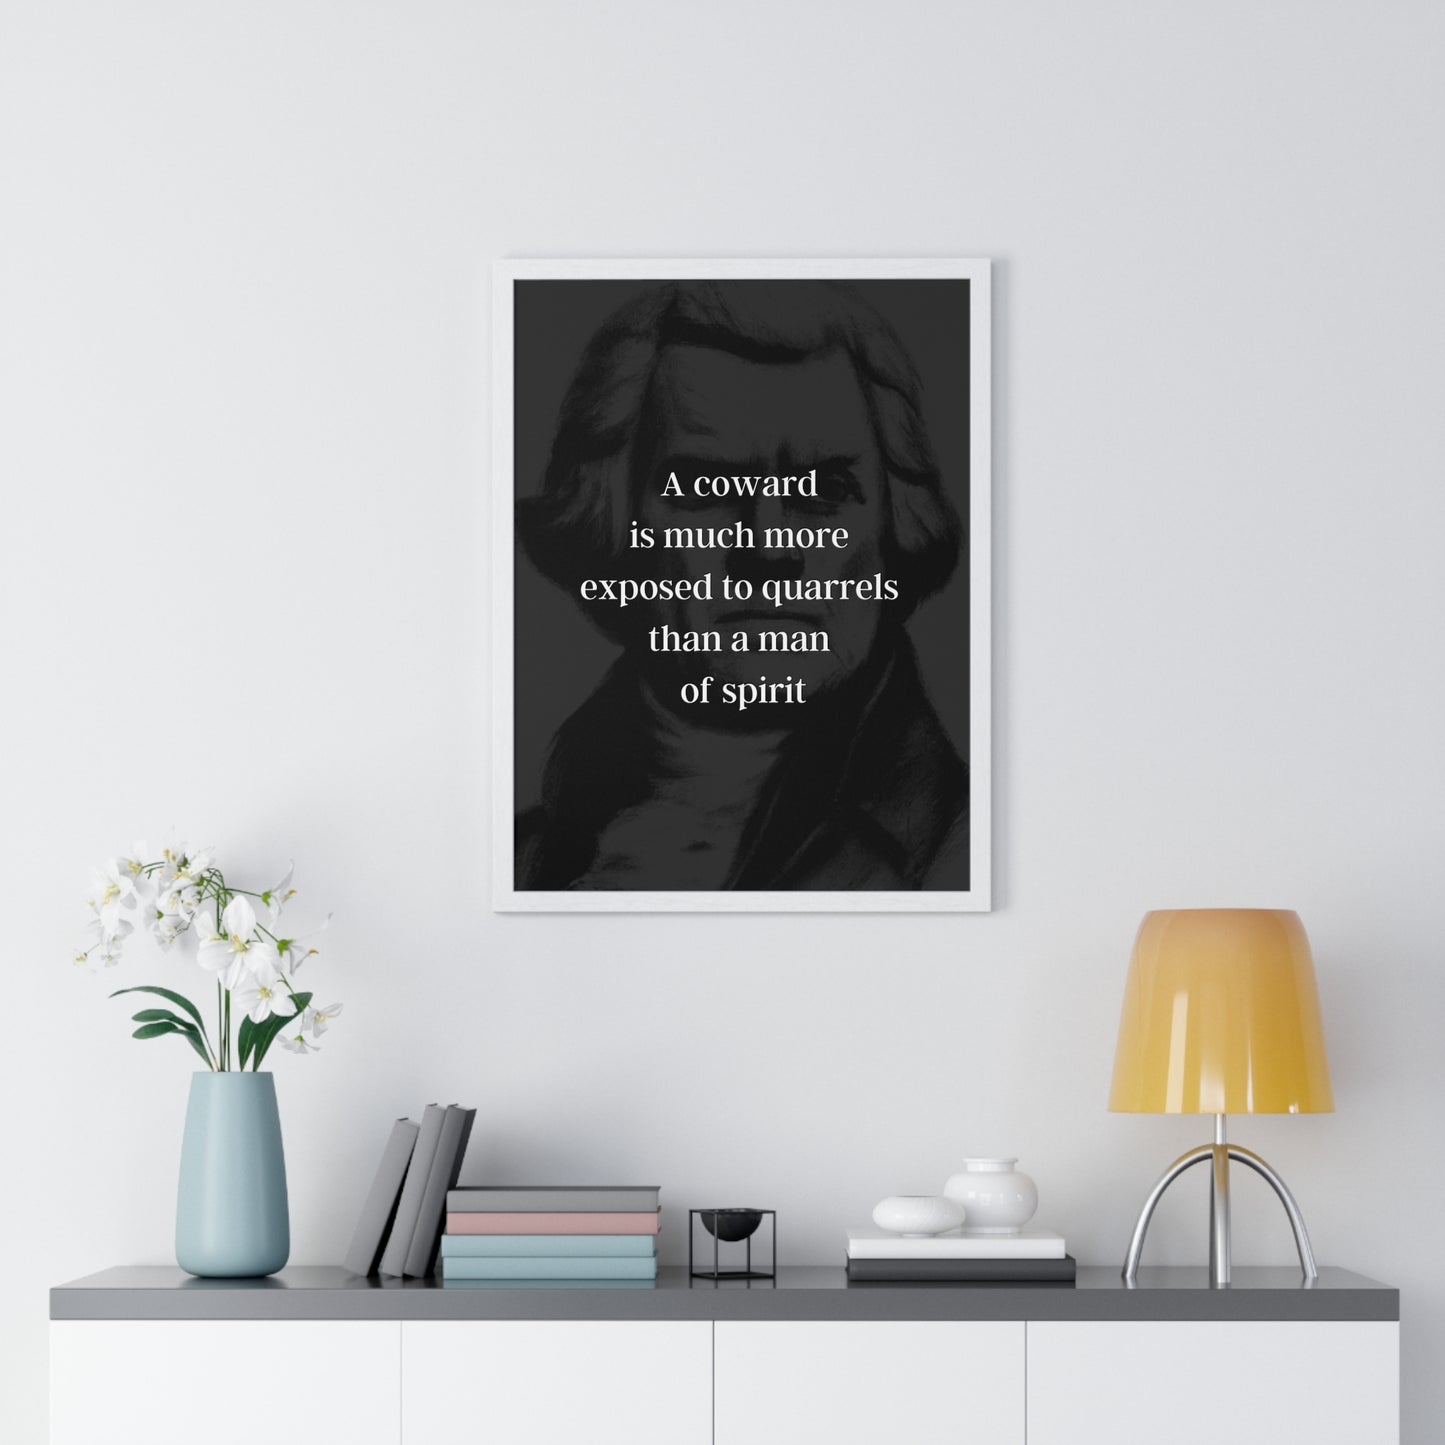 Thomas Jefferson Quote 6, Poster Art, Dark Print, 3rd President of the United States, American Patriots, AI Art, Political Art, Poster Prints, Presidential Portraits, Presidential Quotes, Inspirational Quotes